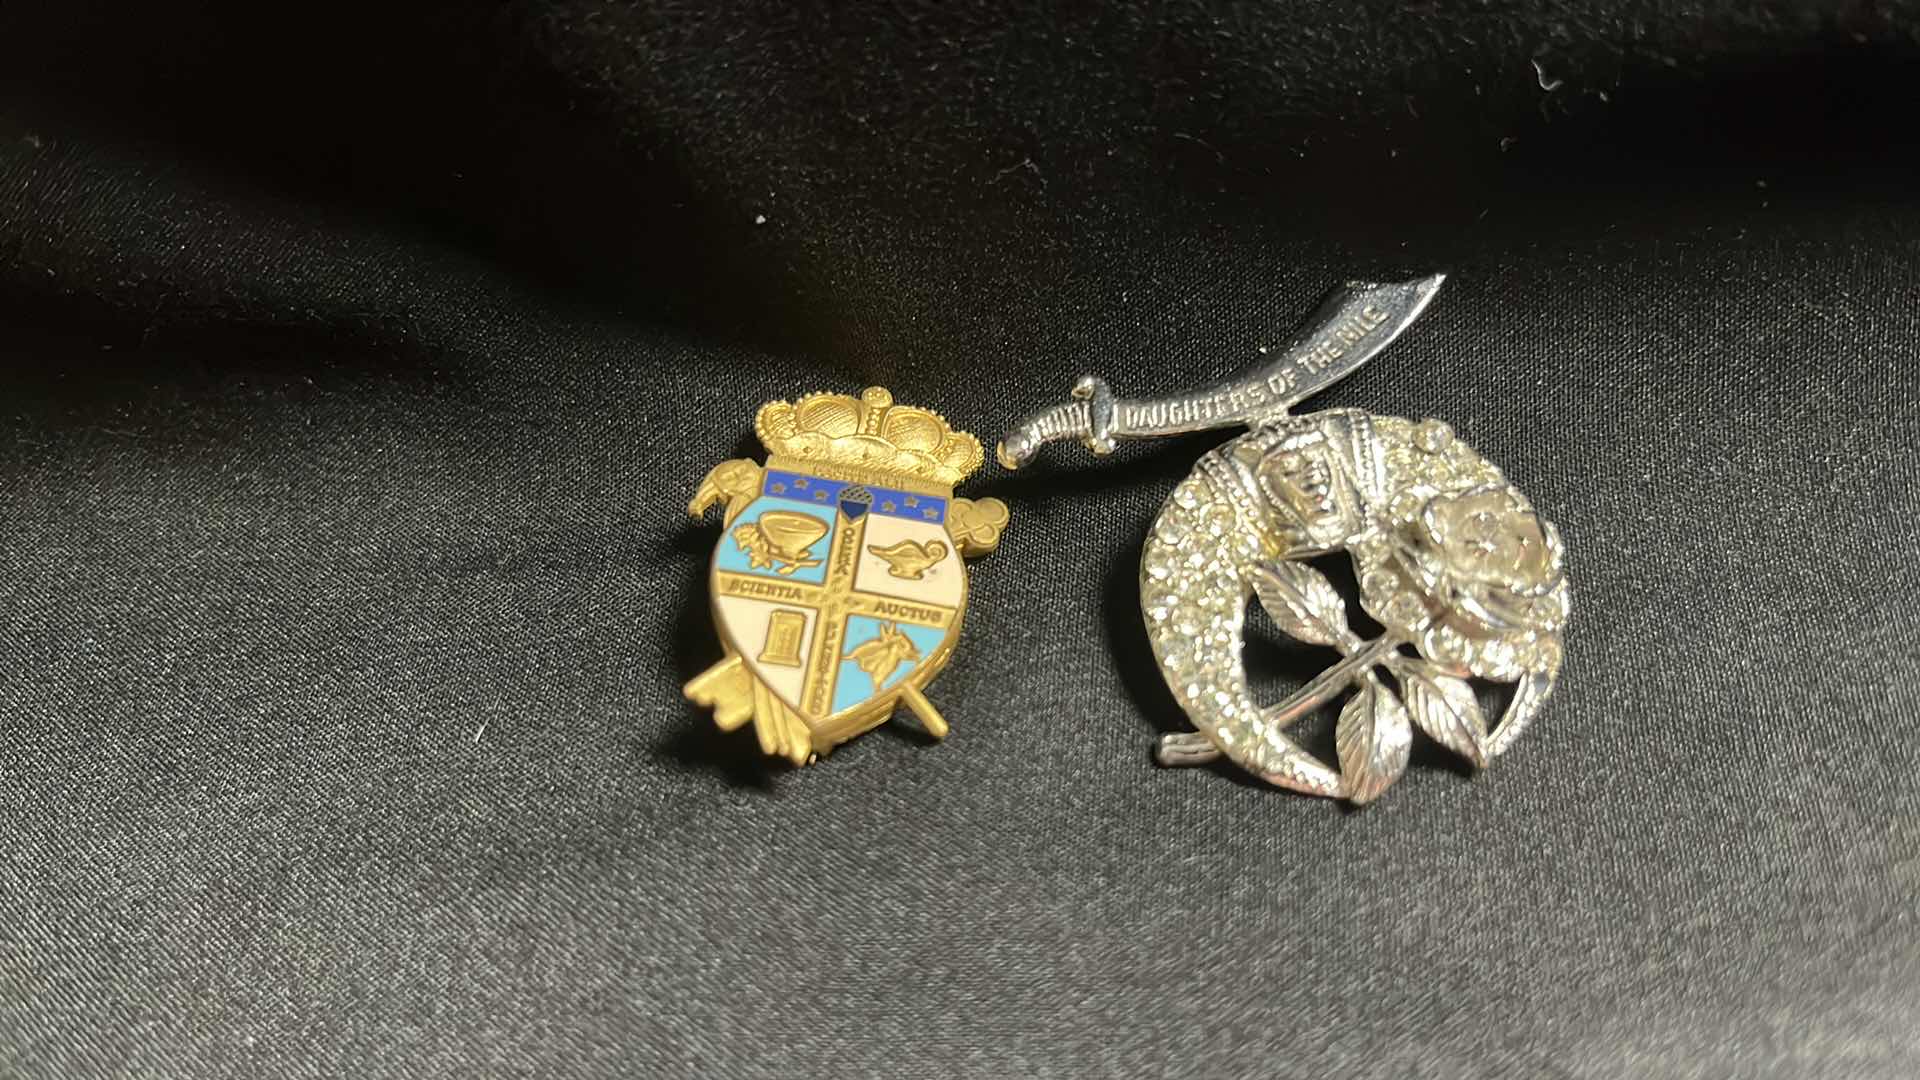 Photo 1 of VINTAGE FACITE ALII OPERA AUCTUS PULCHIRITUDO SHIELD FRATERNITY PIN AND FRATERNAL DAUGHTERS OF THE NILE SILVER TONE W RHINESTONES BROOCH PIN